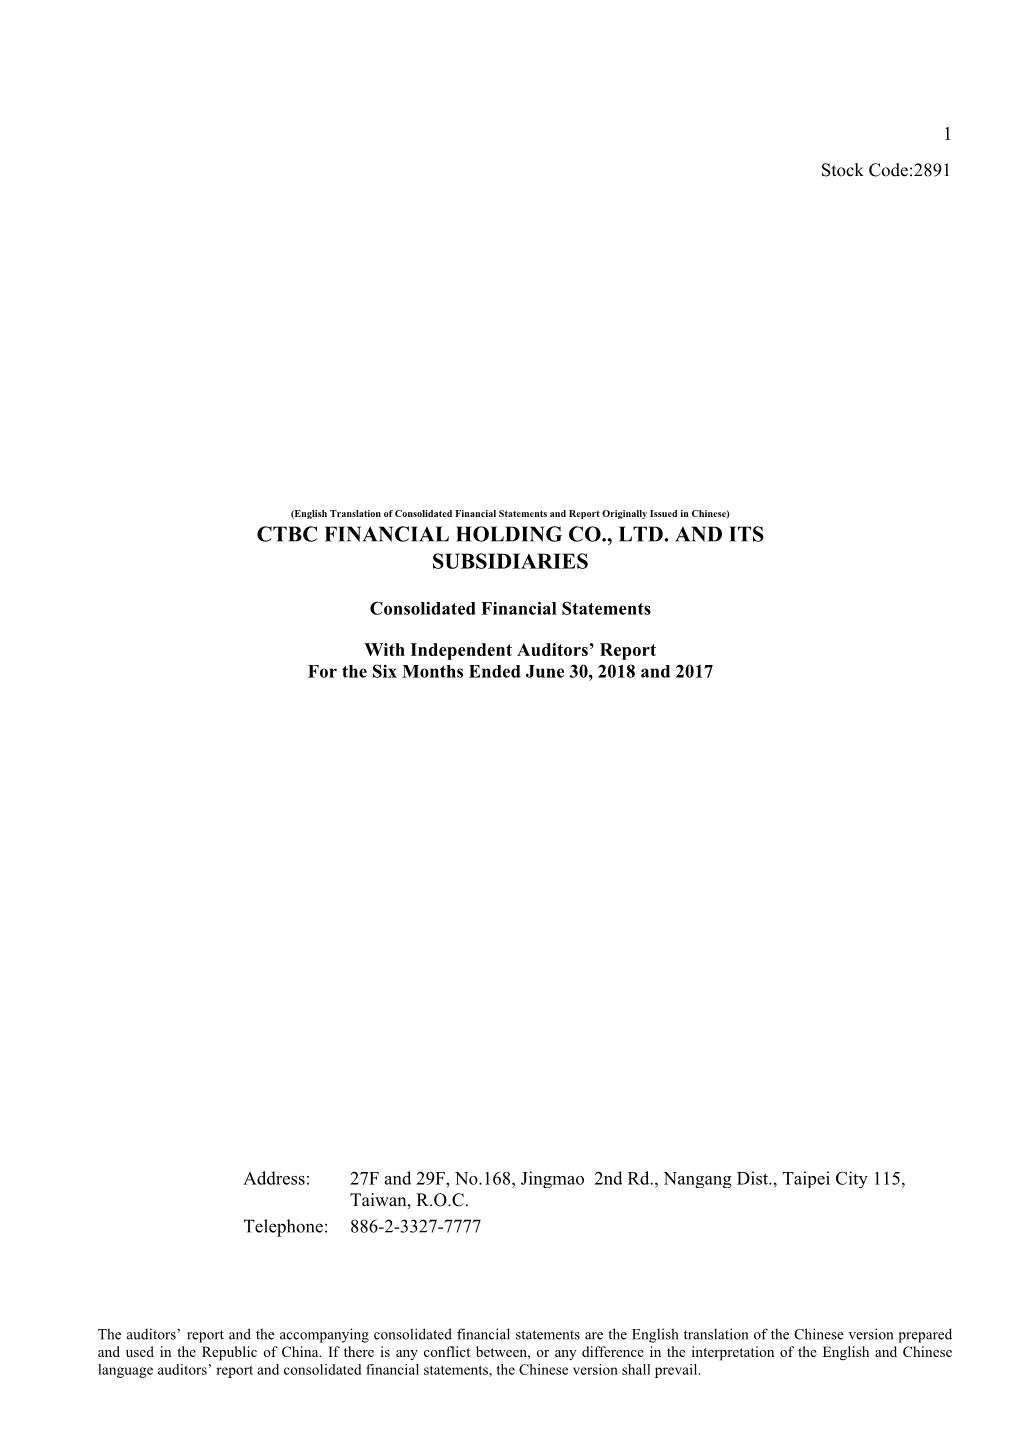 Ctbc Financial Holding Co., Ltd. and Its Subsidiaries